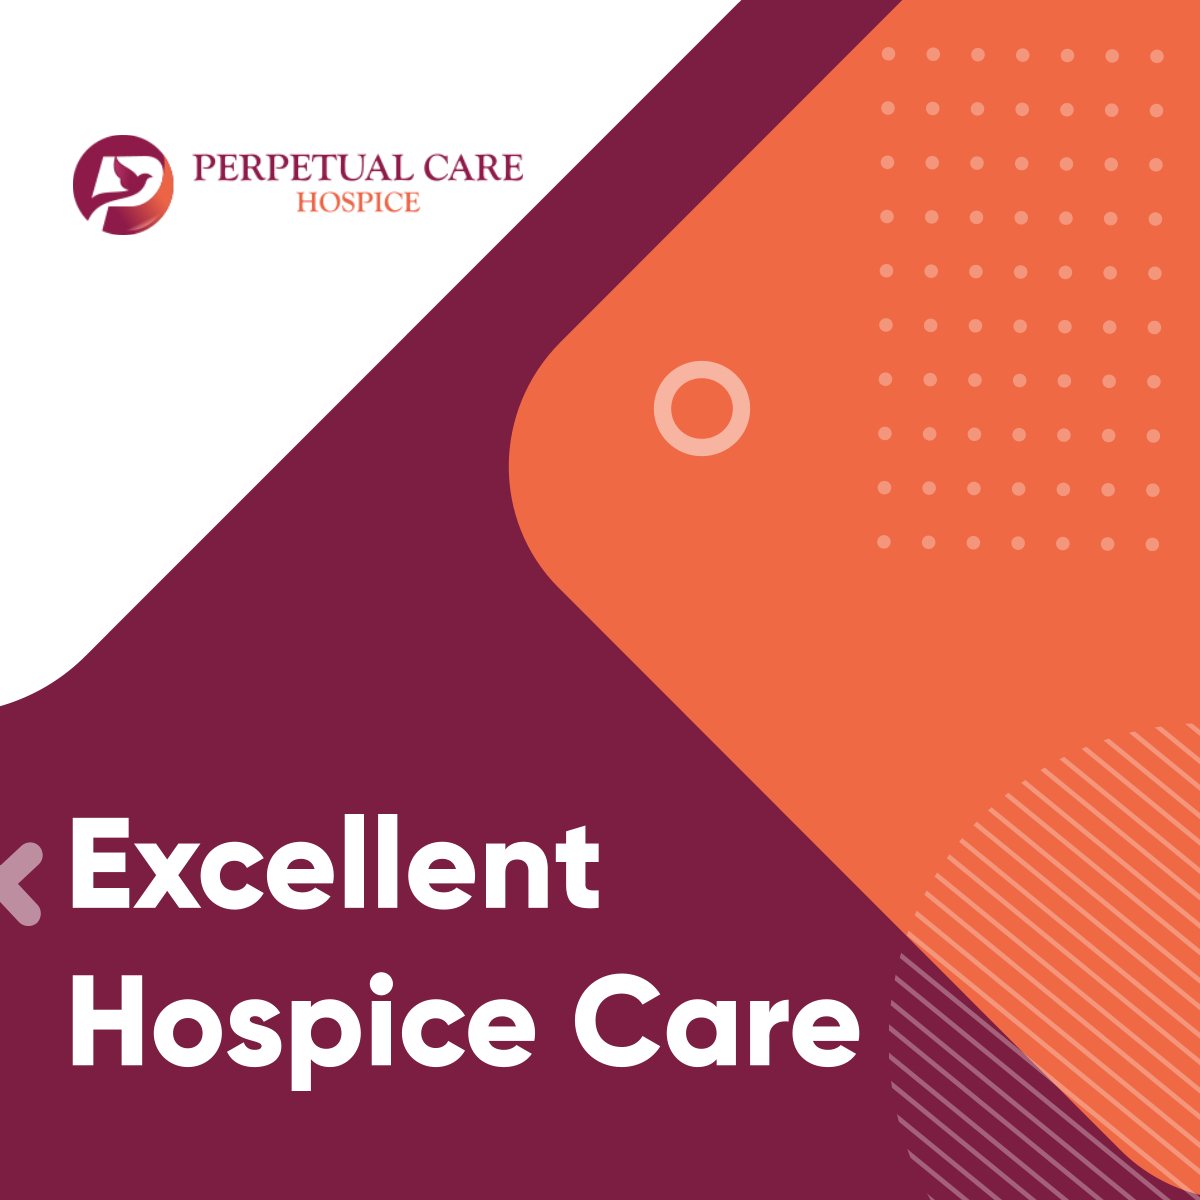 Providing people with high-quality care that can help them feel at peace and comfort during their time of need is our ultimate goal in hospice care, offering them the best possible help.

#CareProviders #HospiceCare #SimiValleyCA